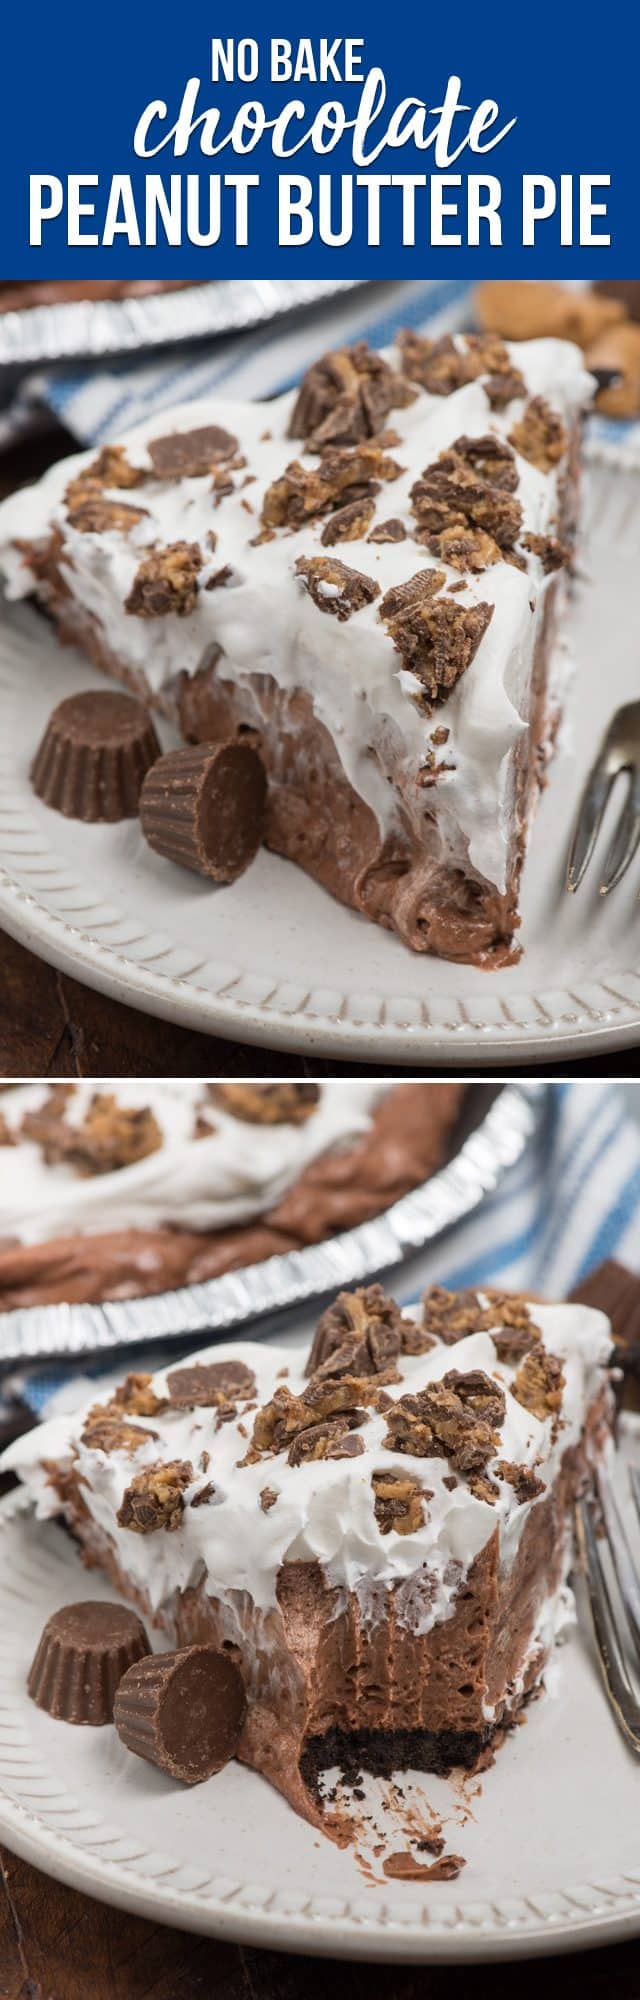 collage of chocolate peanut butter pie photos